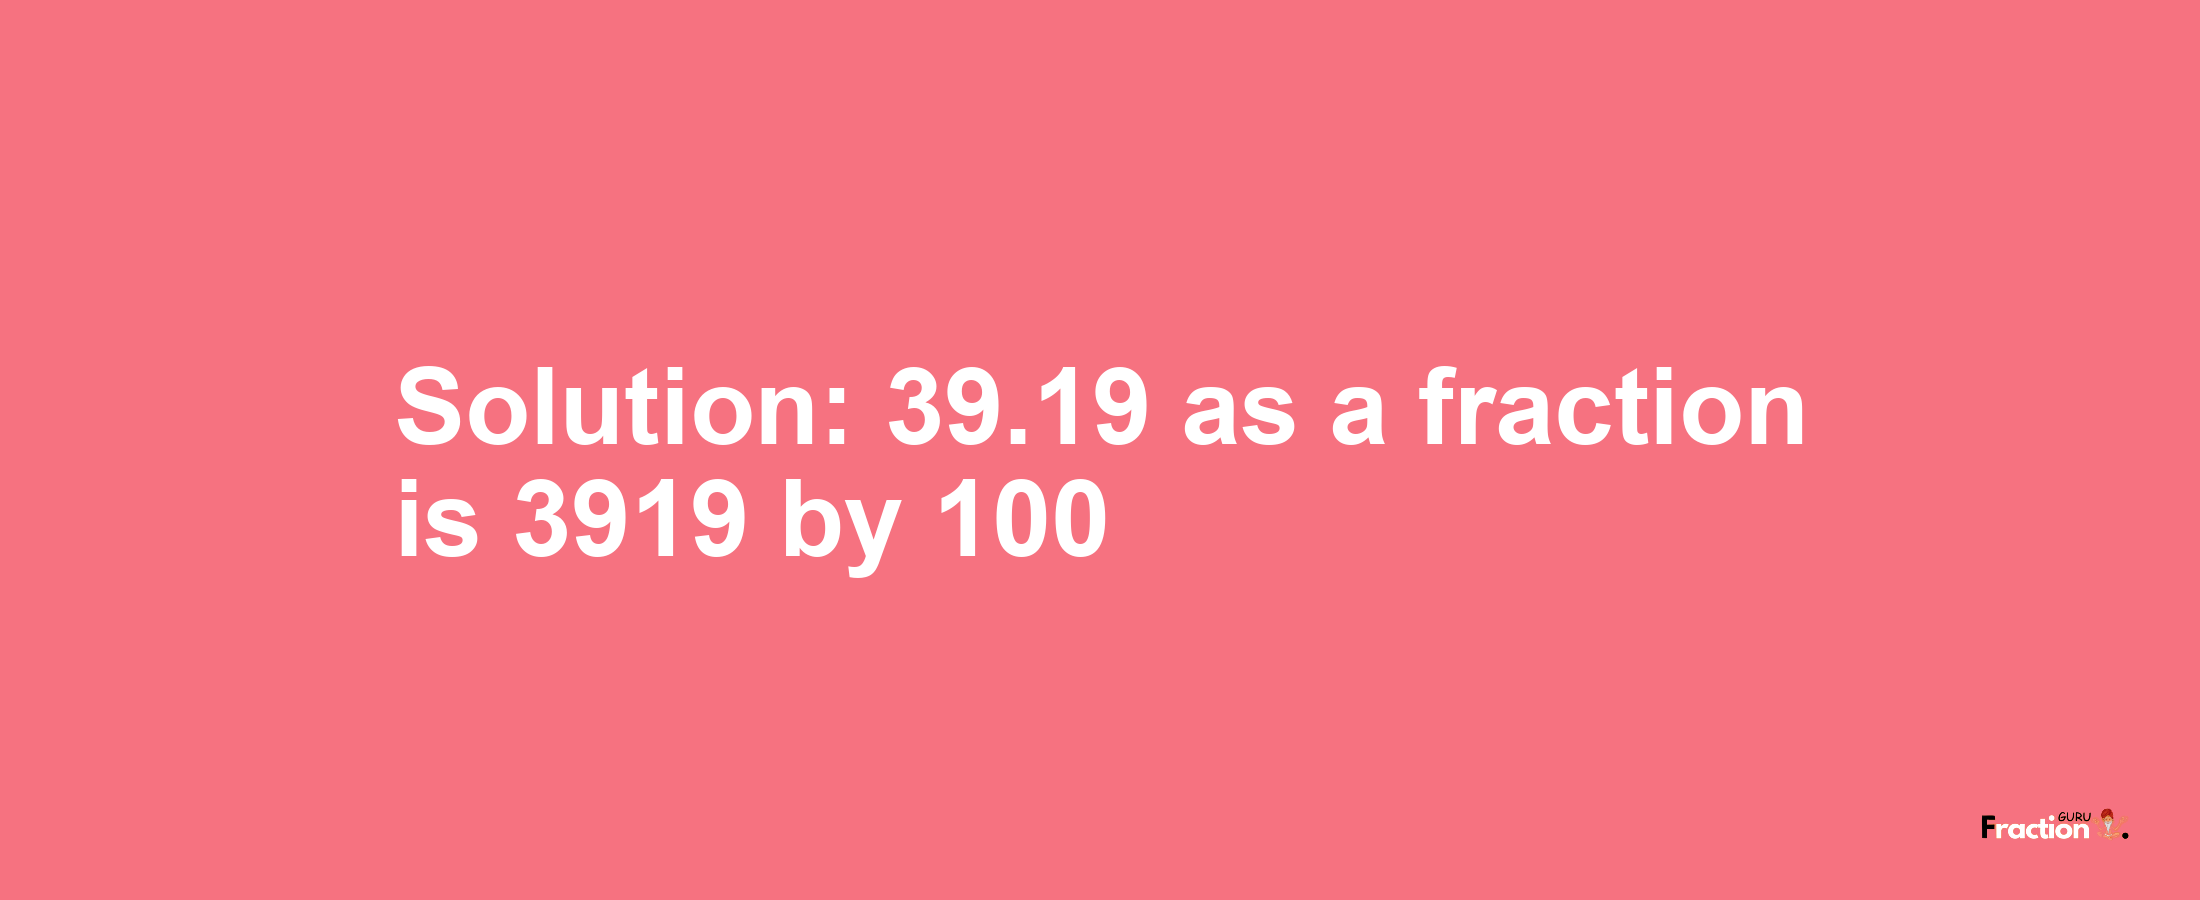 Solution:39.19 as a fraction is 3919/100